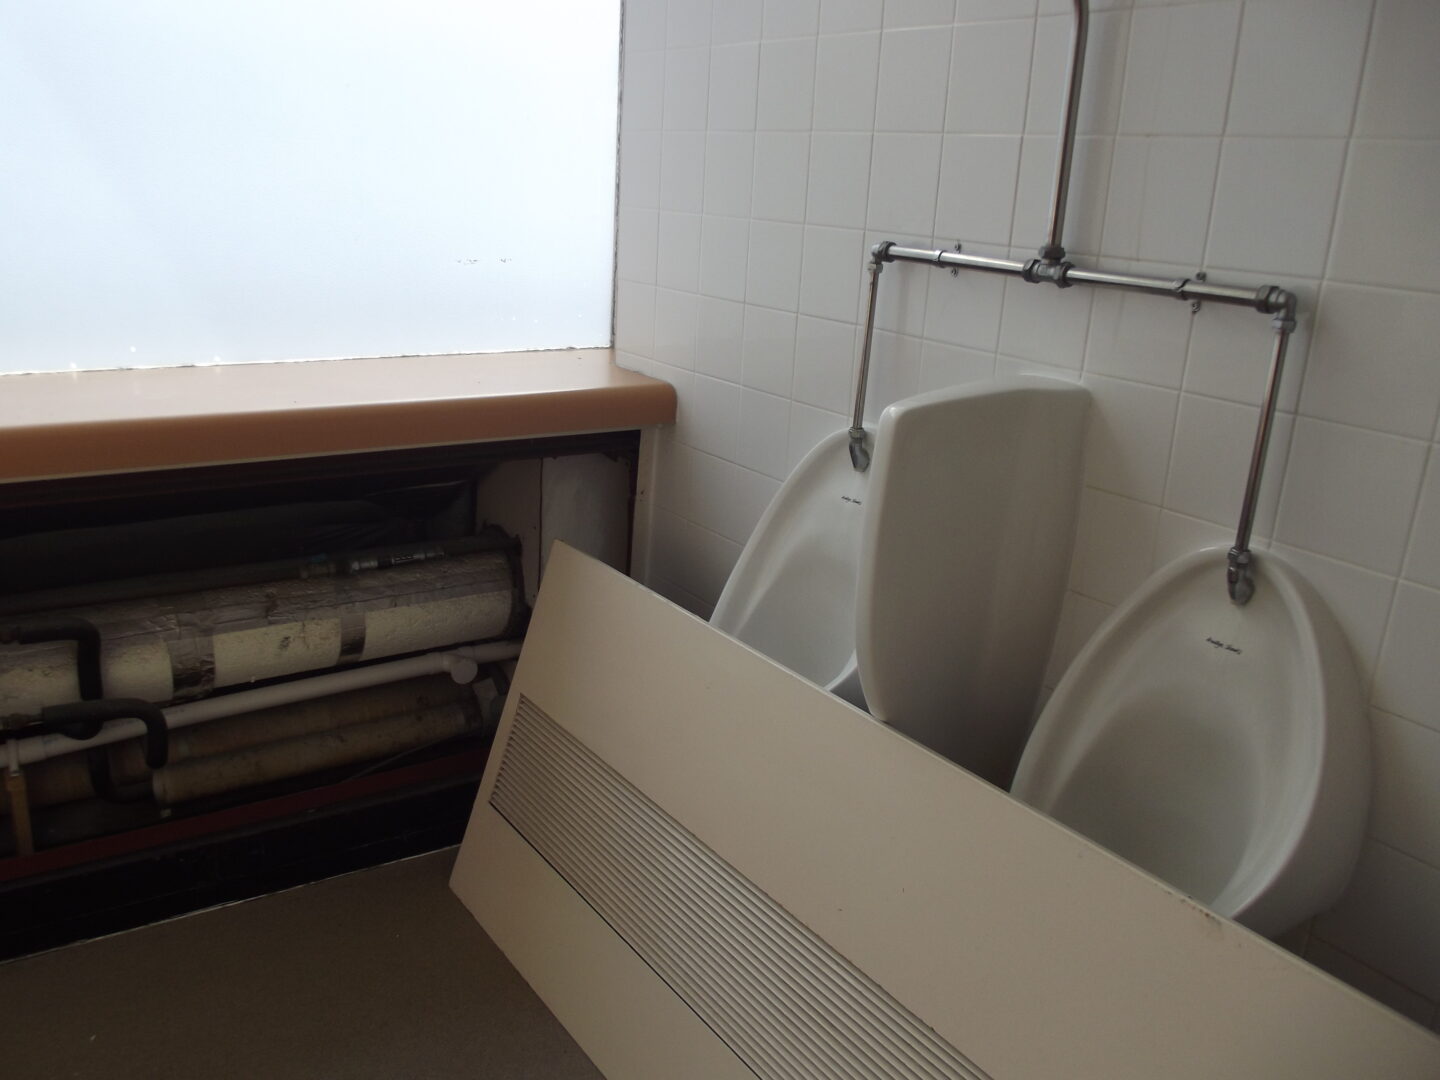 One of the gents' toilets, 24 Sep 2011